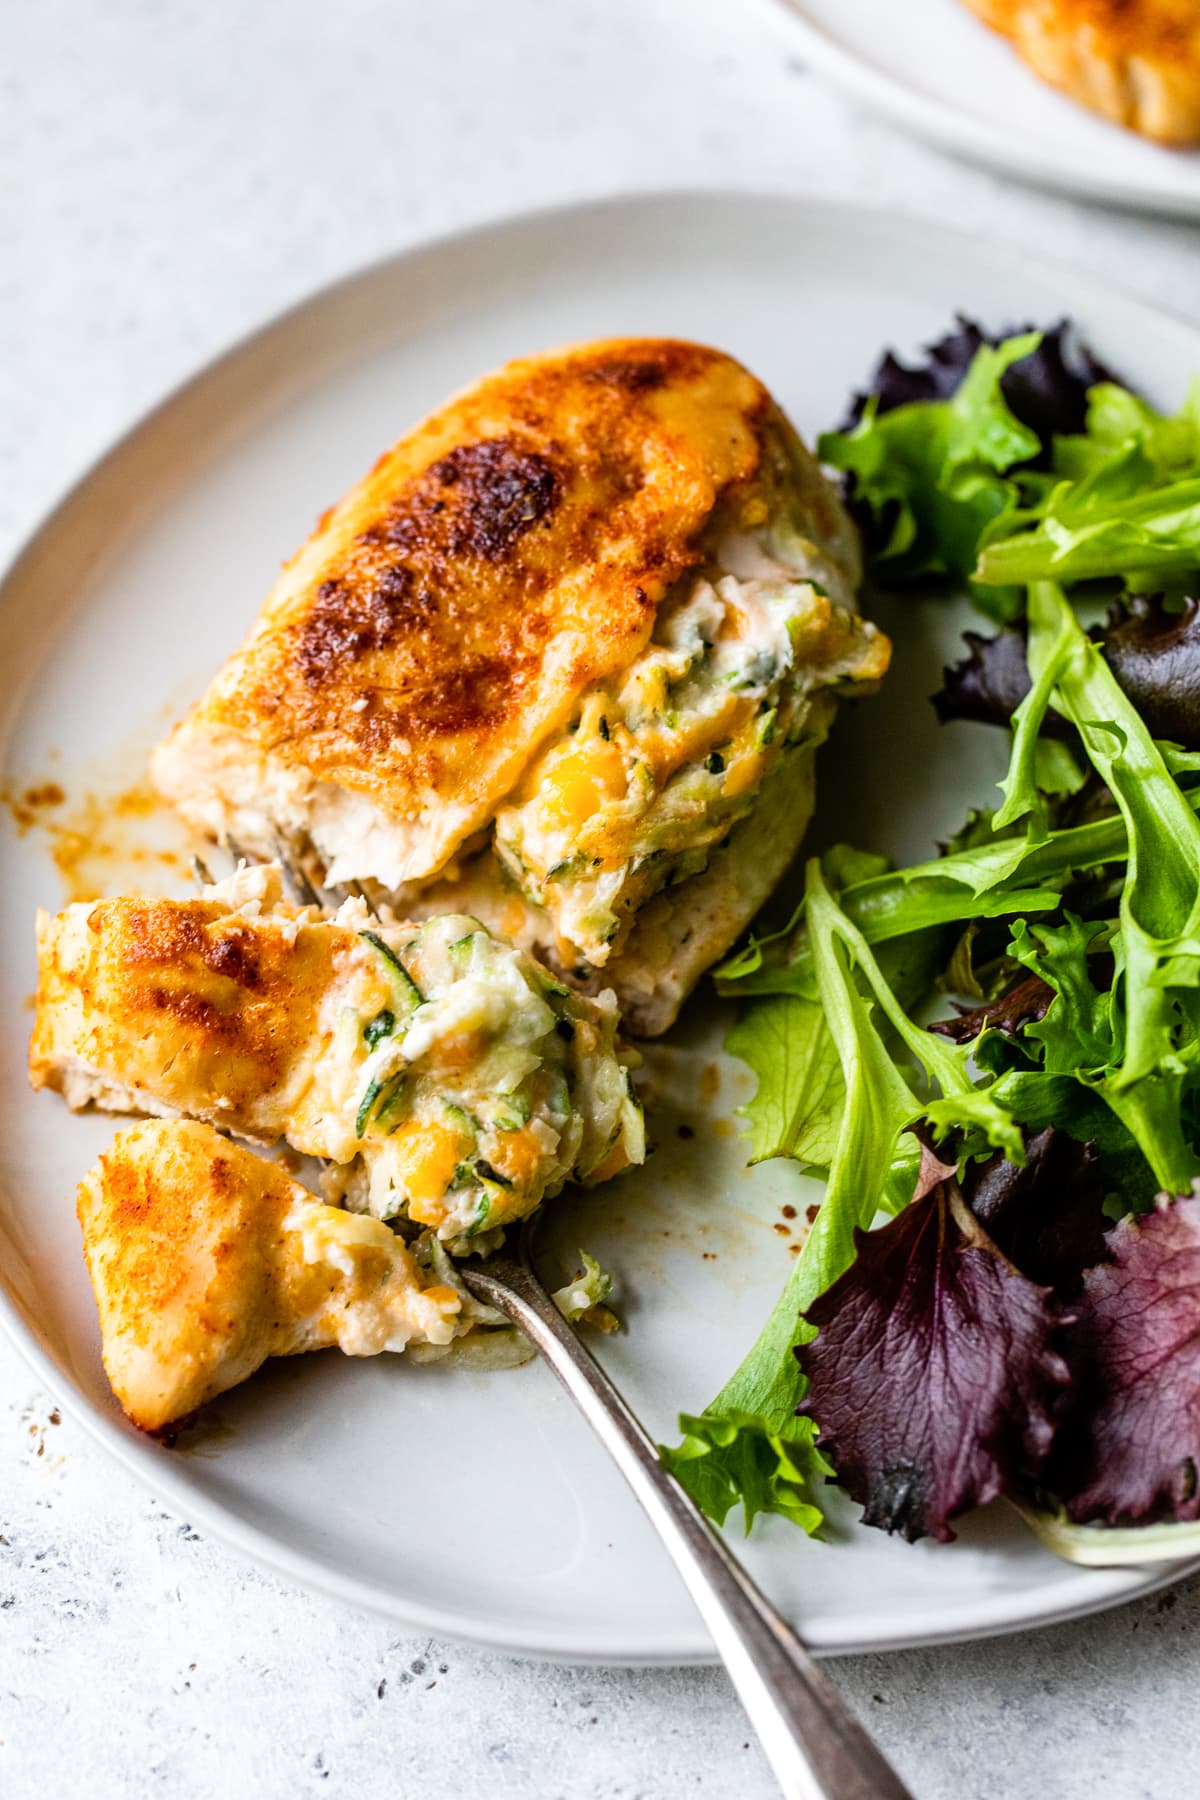 Stuffed chicken breast and salad